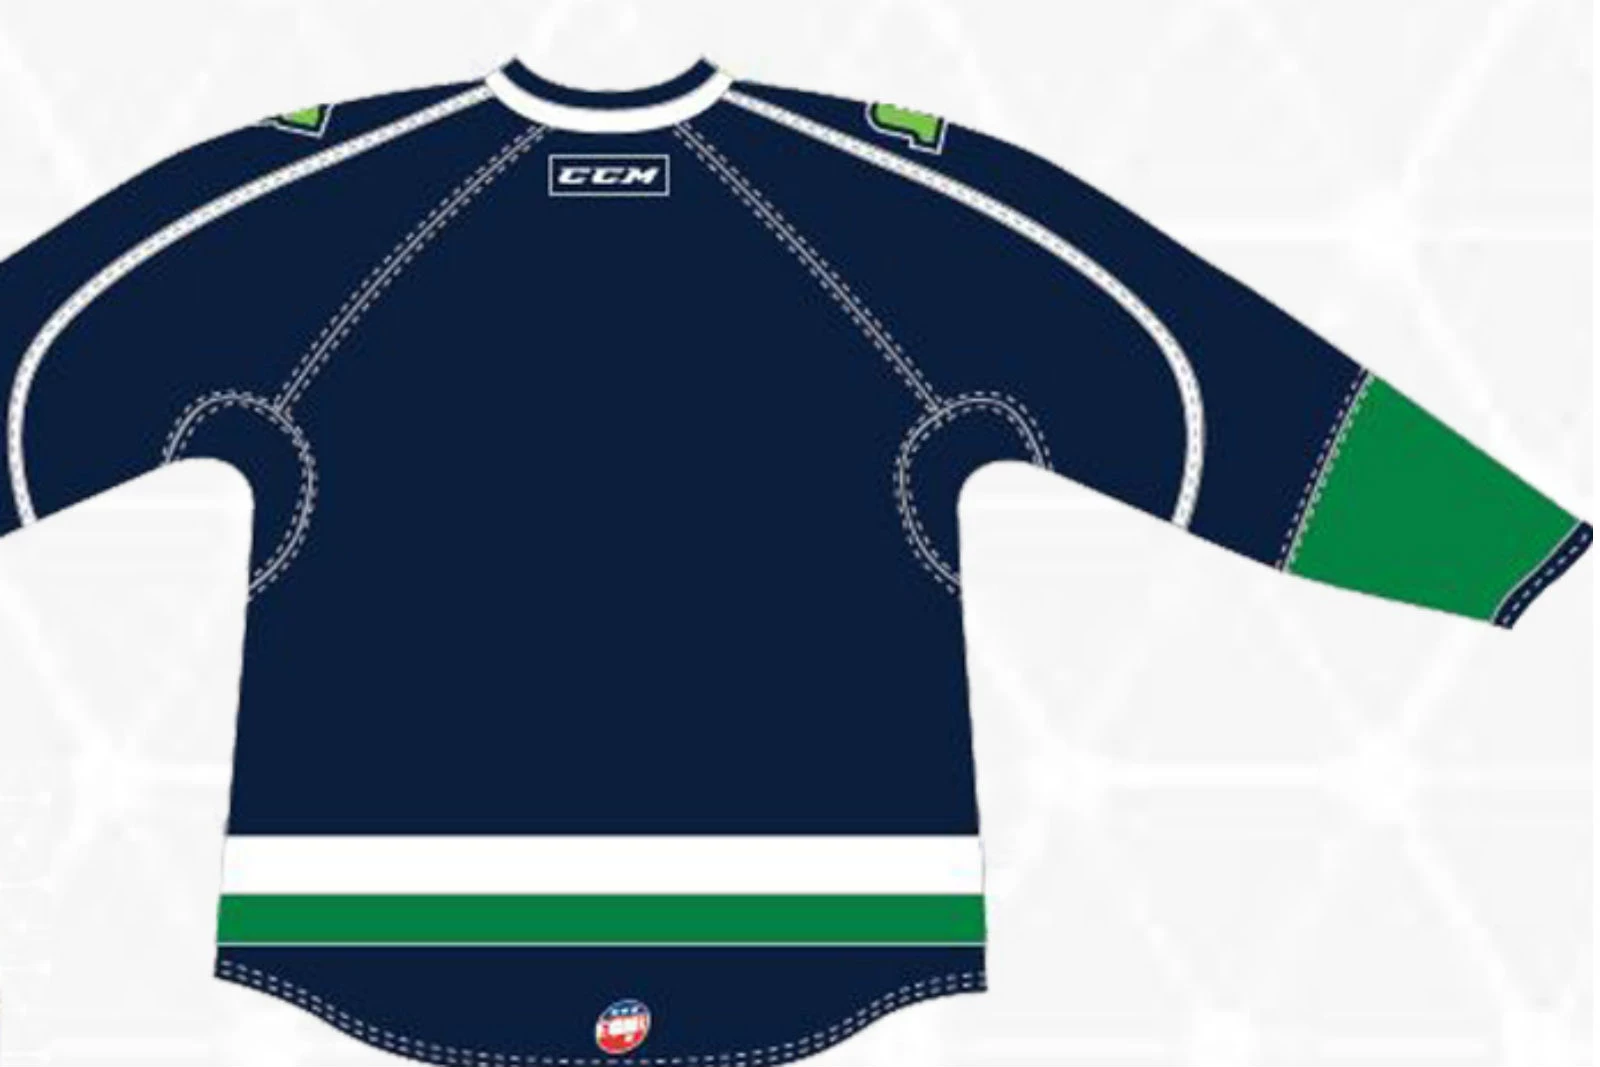 Maine Mariners introduce new jersey